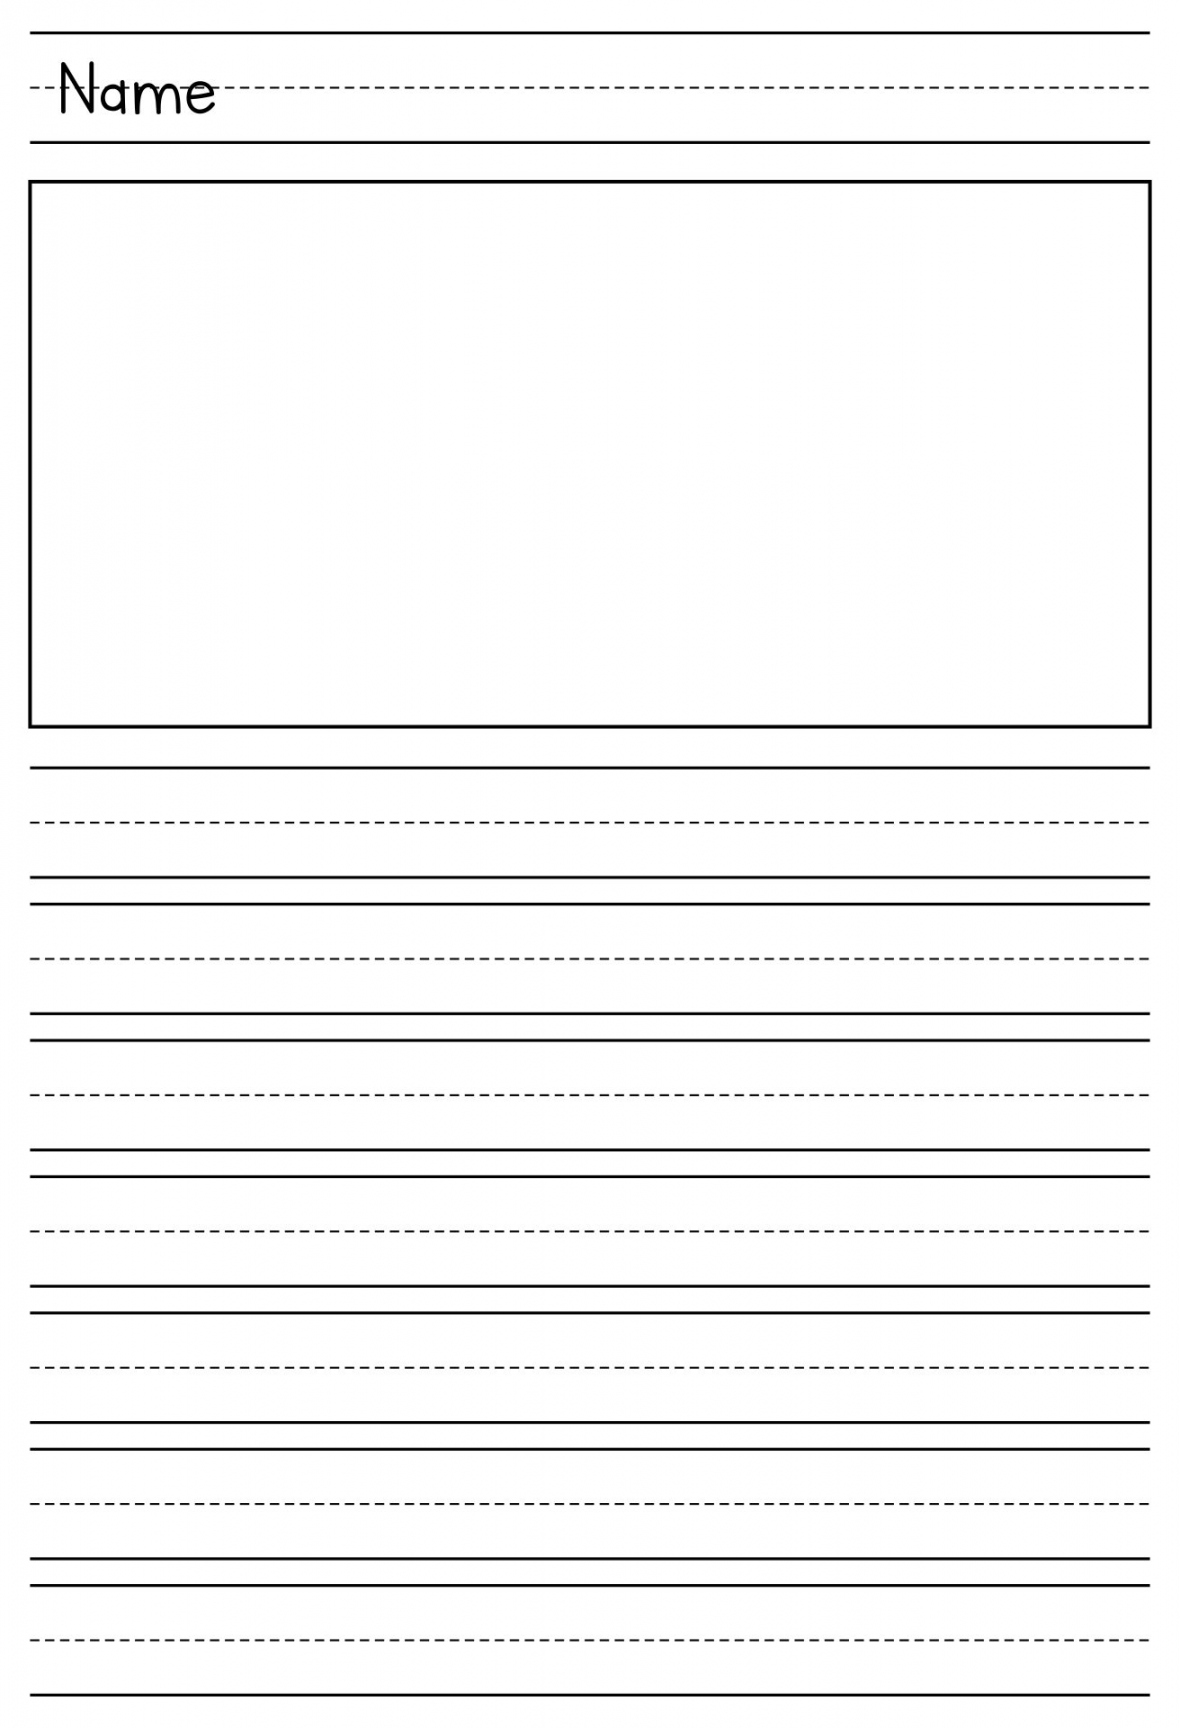 Best Printable Primary Writing Paper Template - printablee - Writing Paper Free Printable